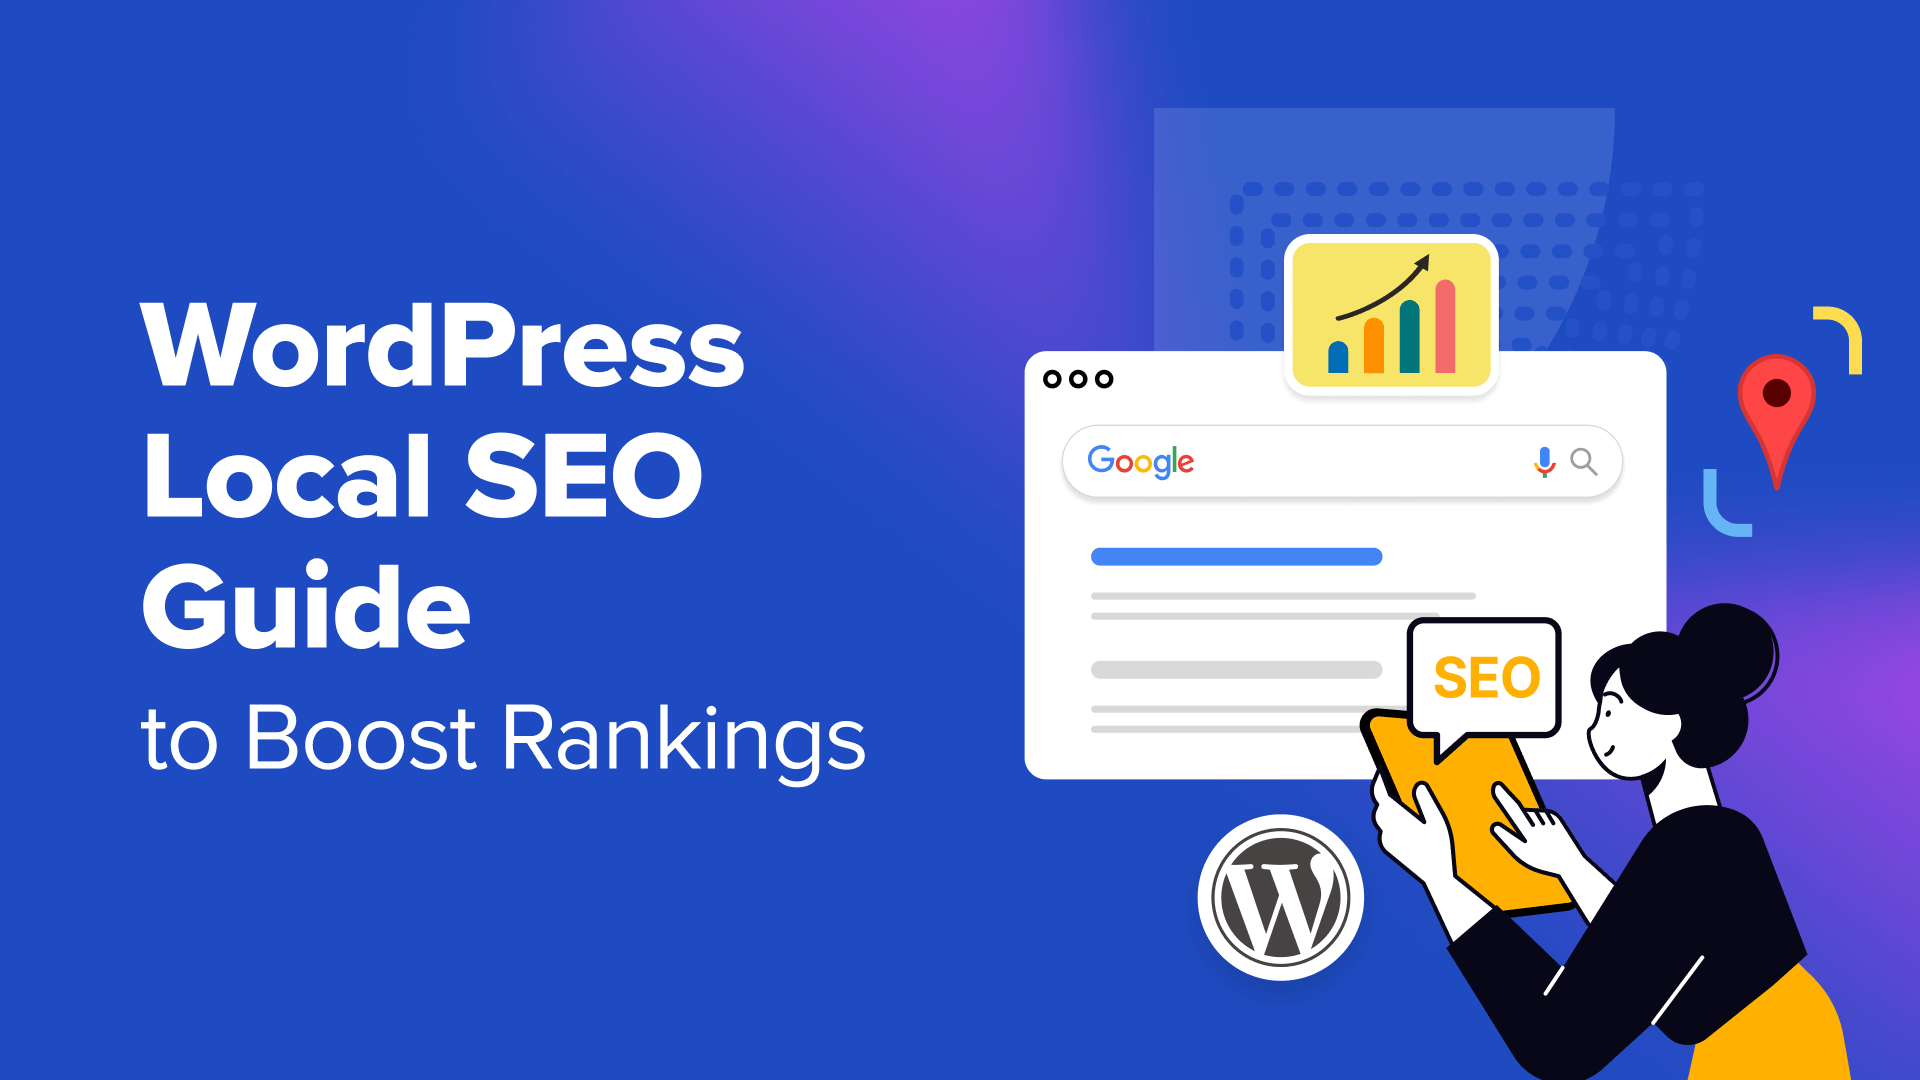 The Ultimate WordPress Local SEO Guide to Boost Rankings